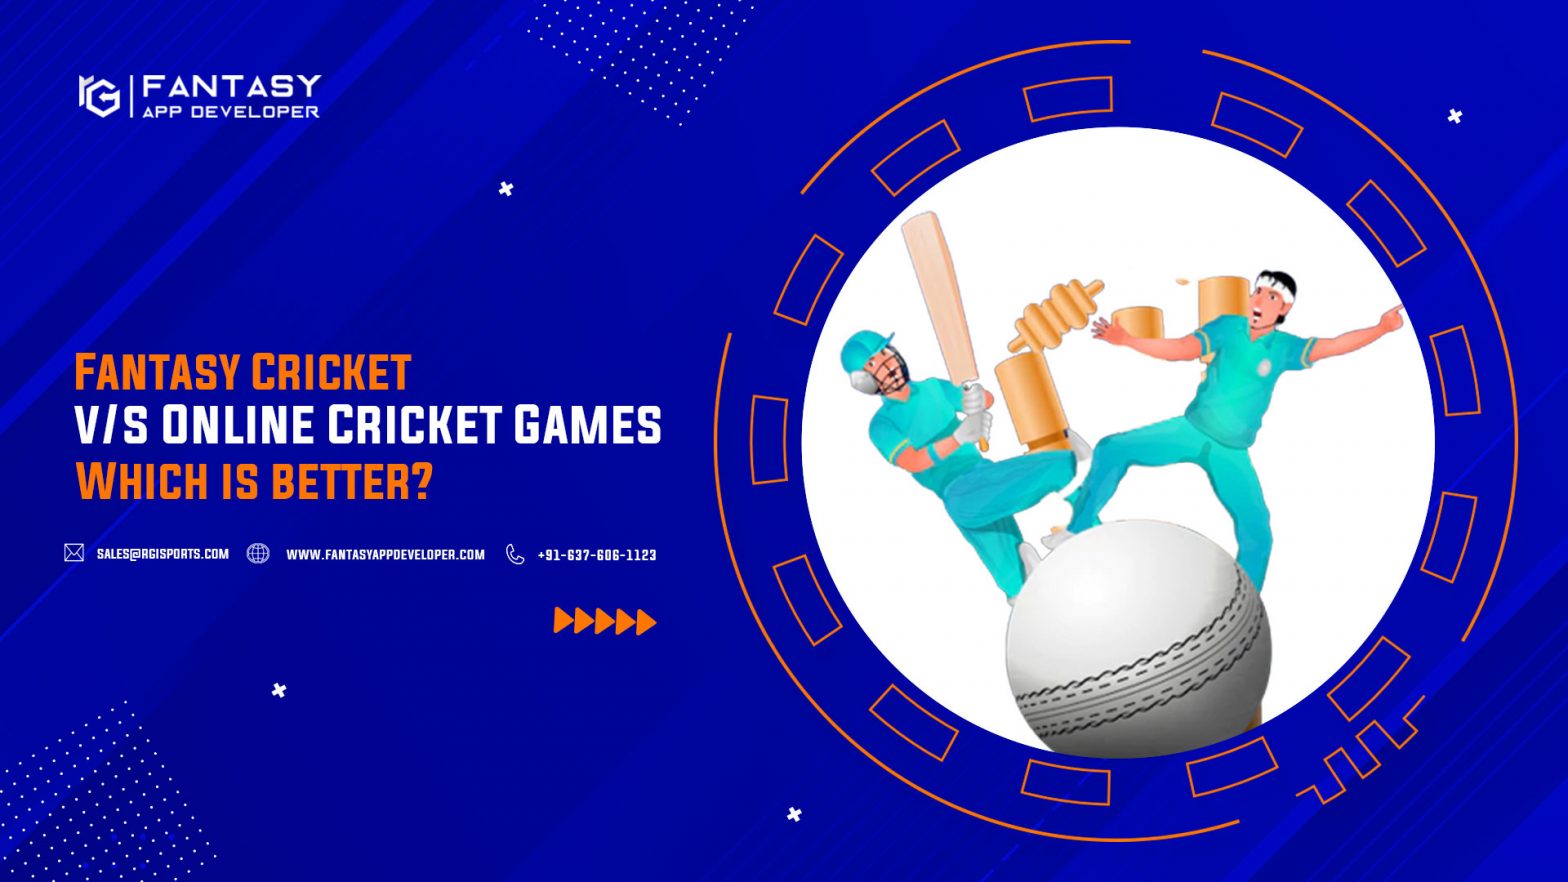 Fantasy-Cricket-is-better-than-Online-Cricket-Games